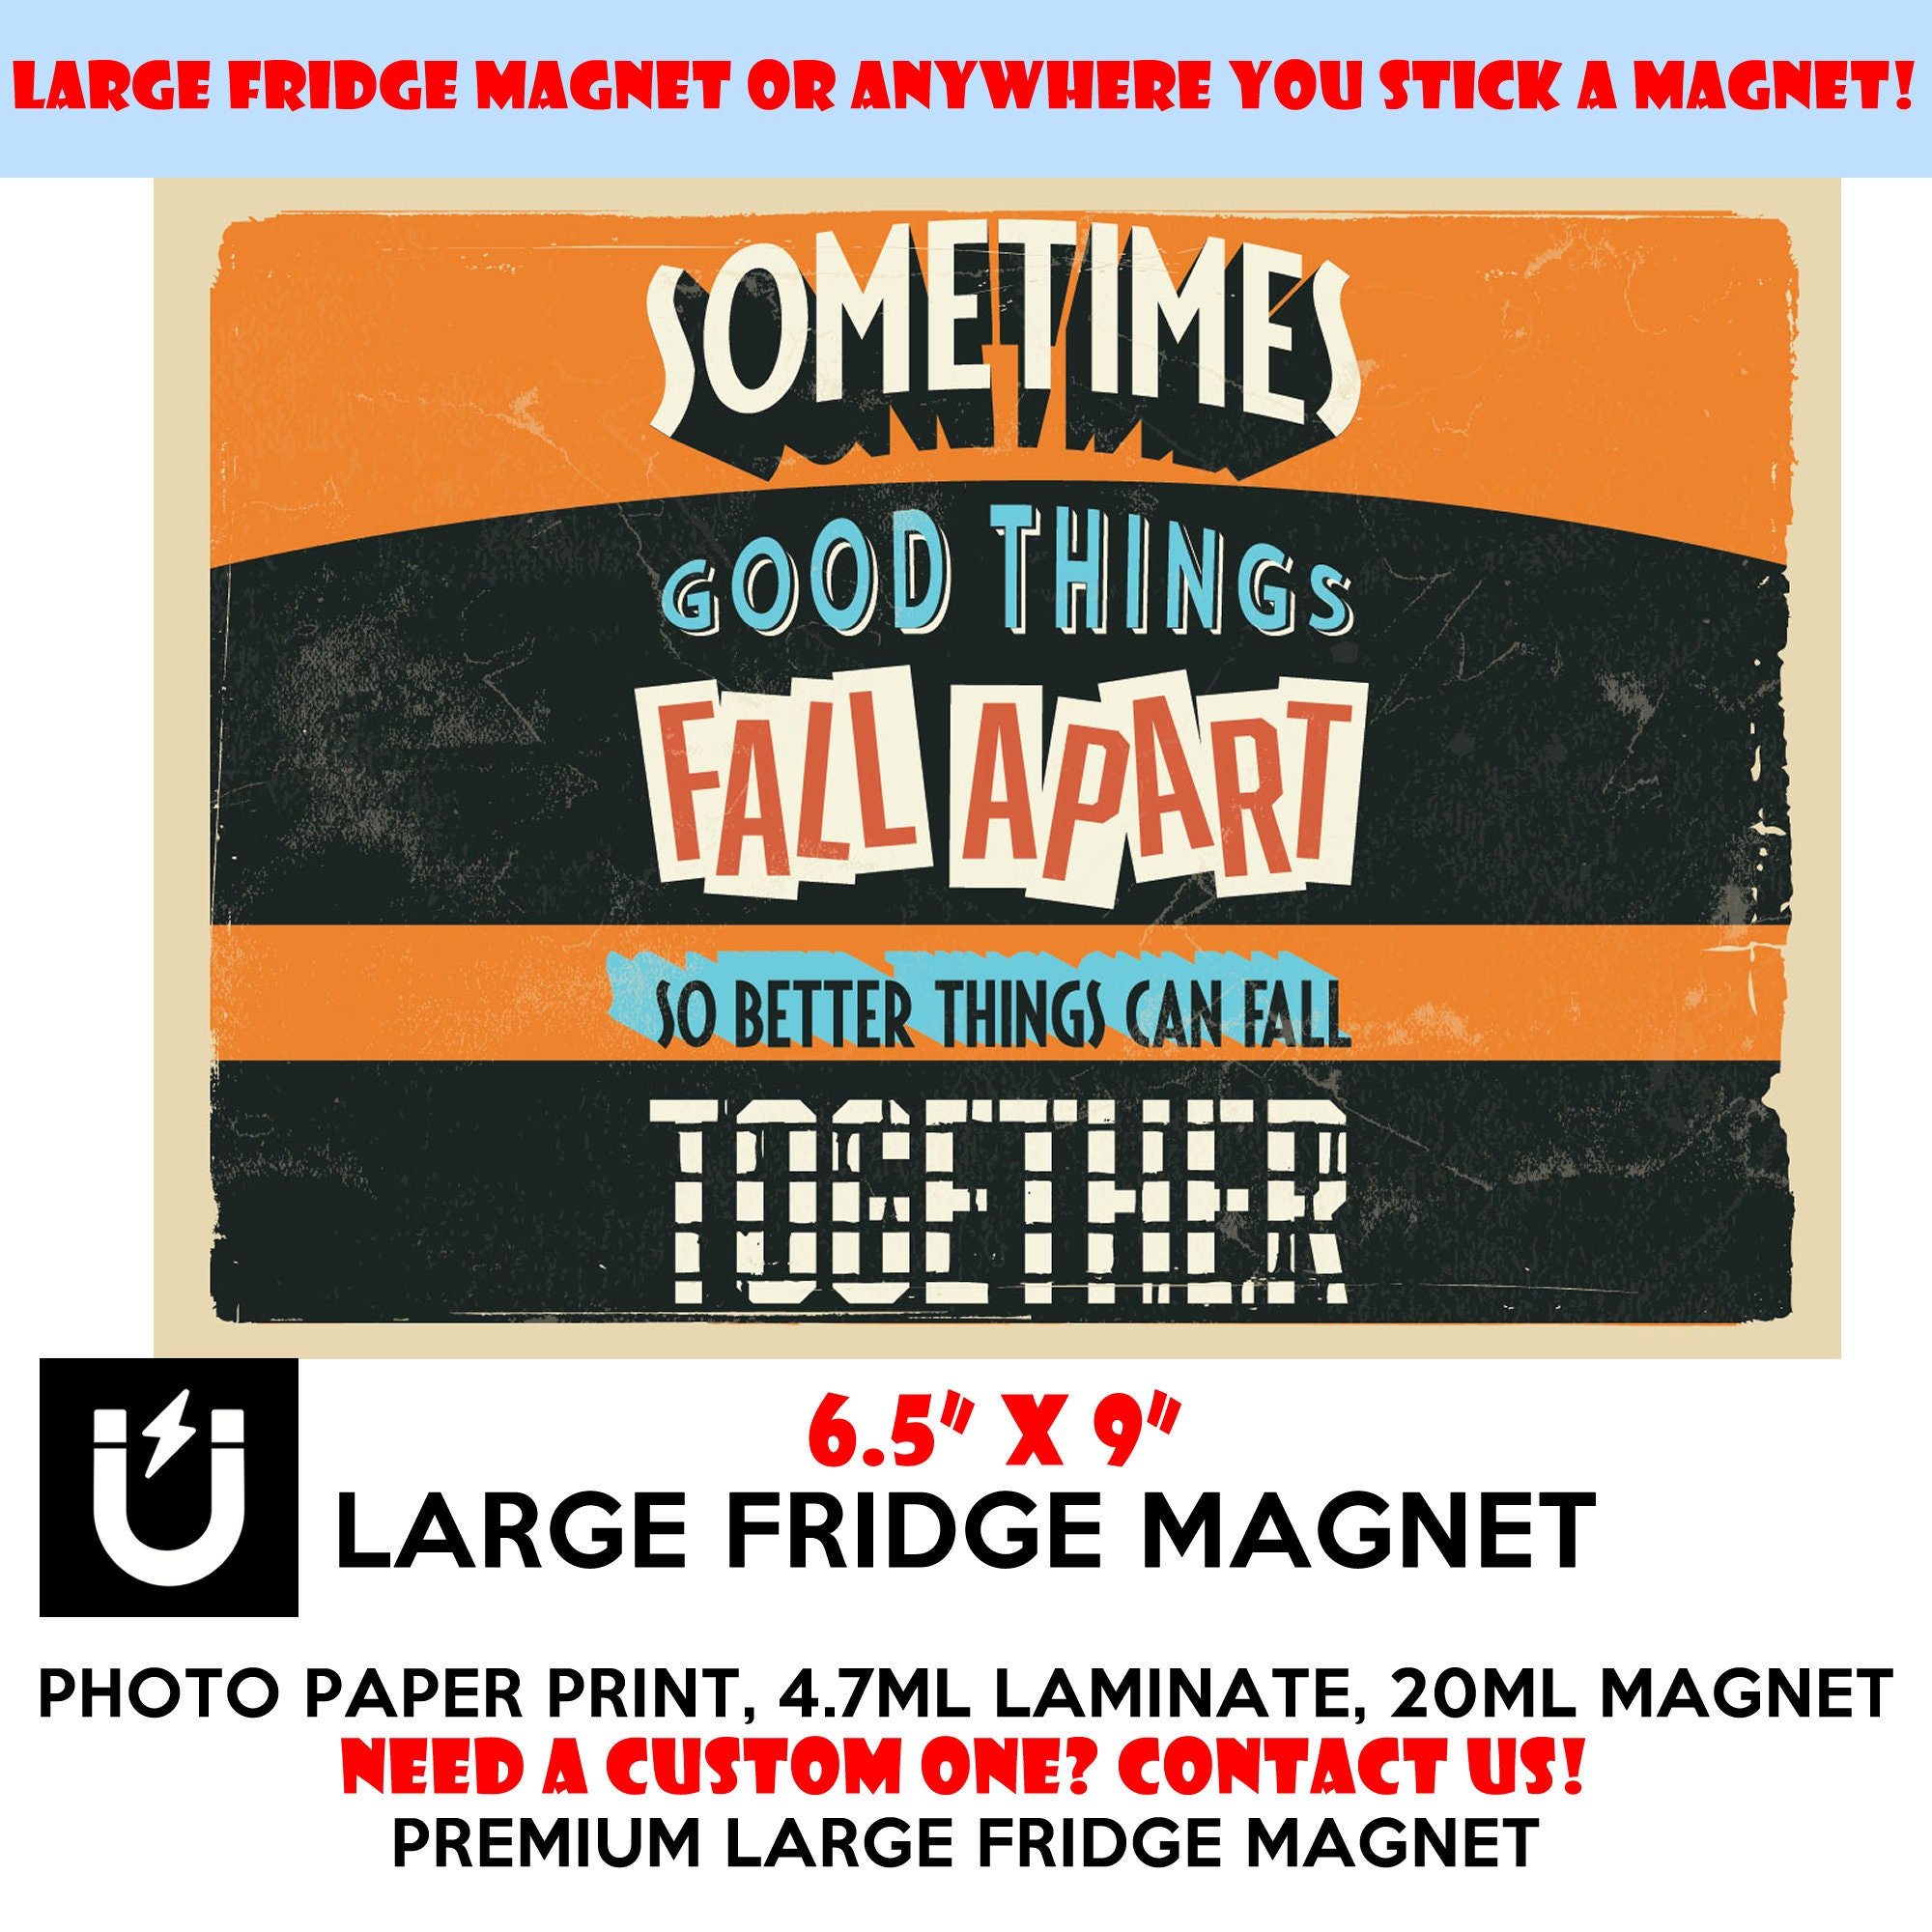 King Of Stickers Sometimes good things fall apart so better things can fall together fridge magnet 6.5 inch x 9 inch motivational premium large magnet